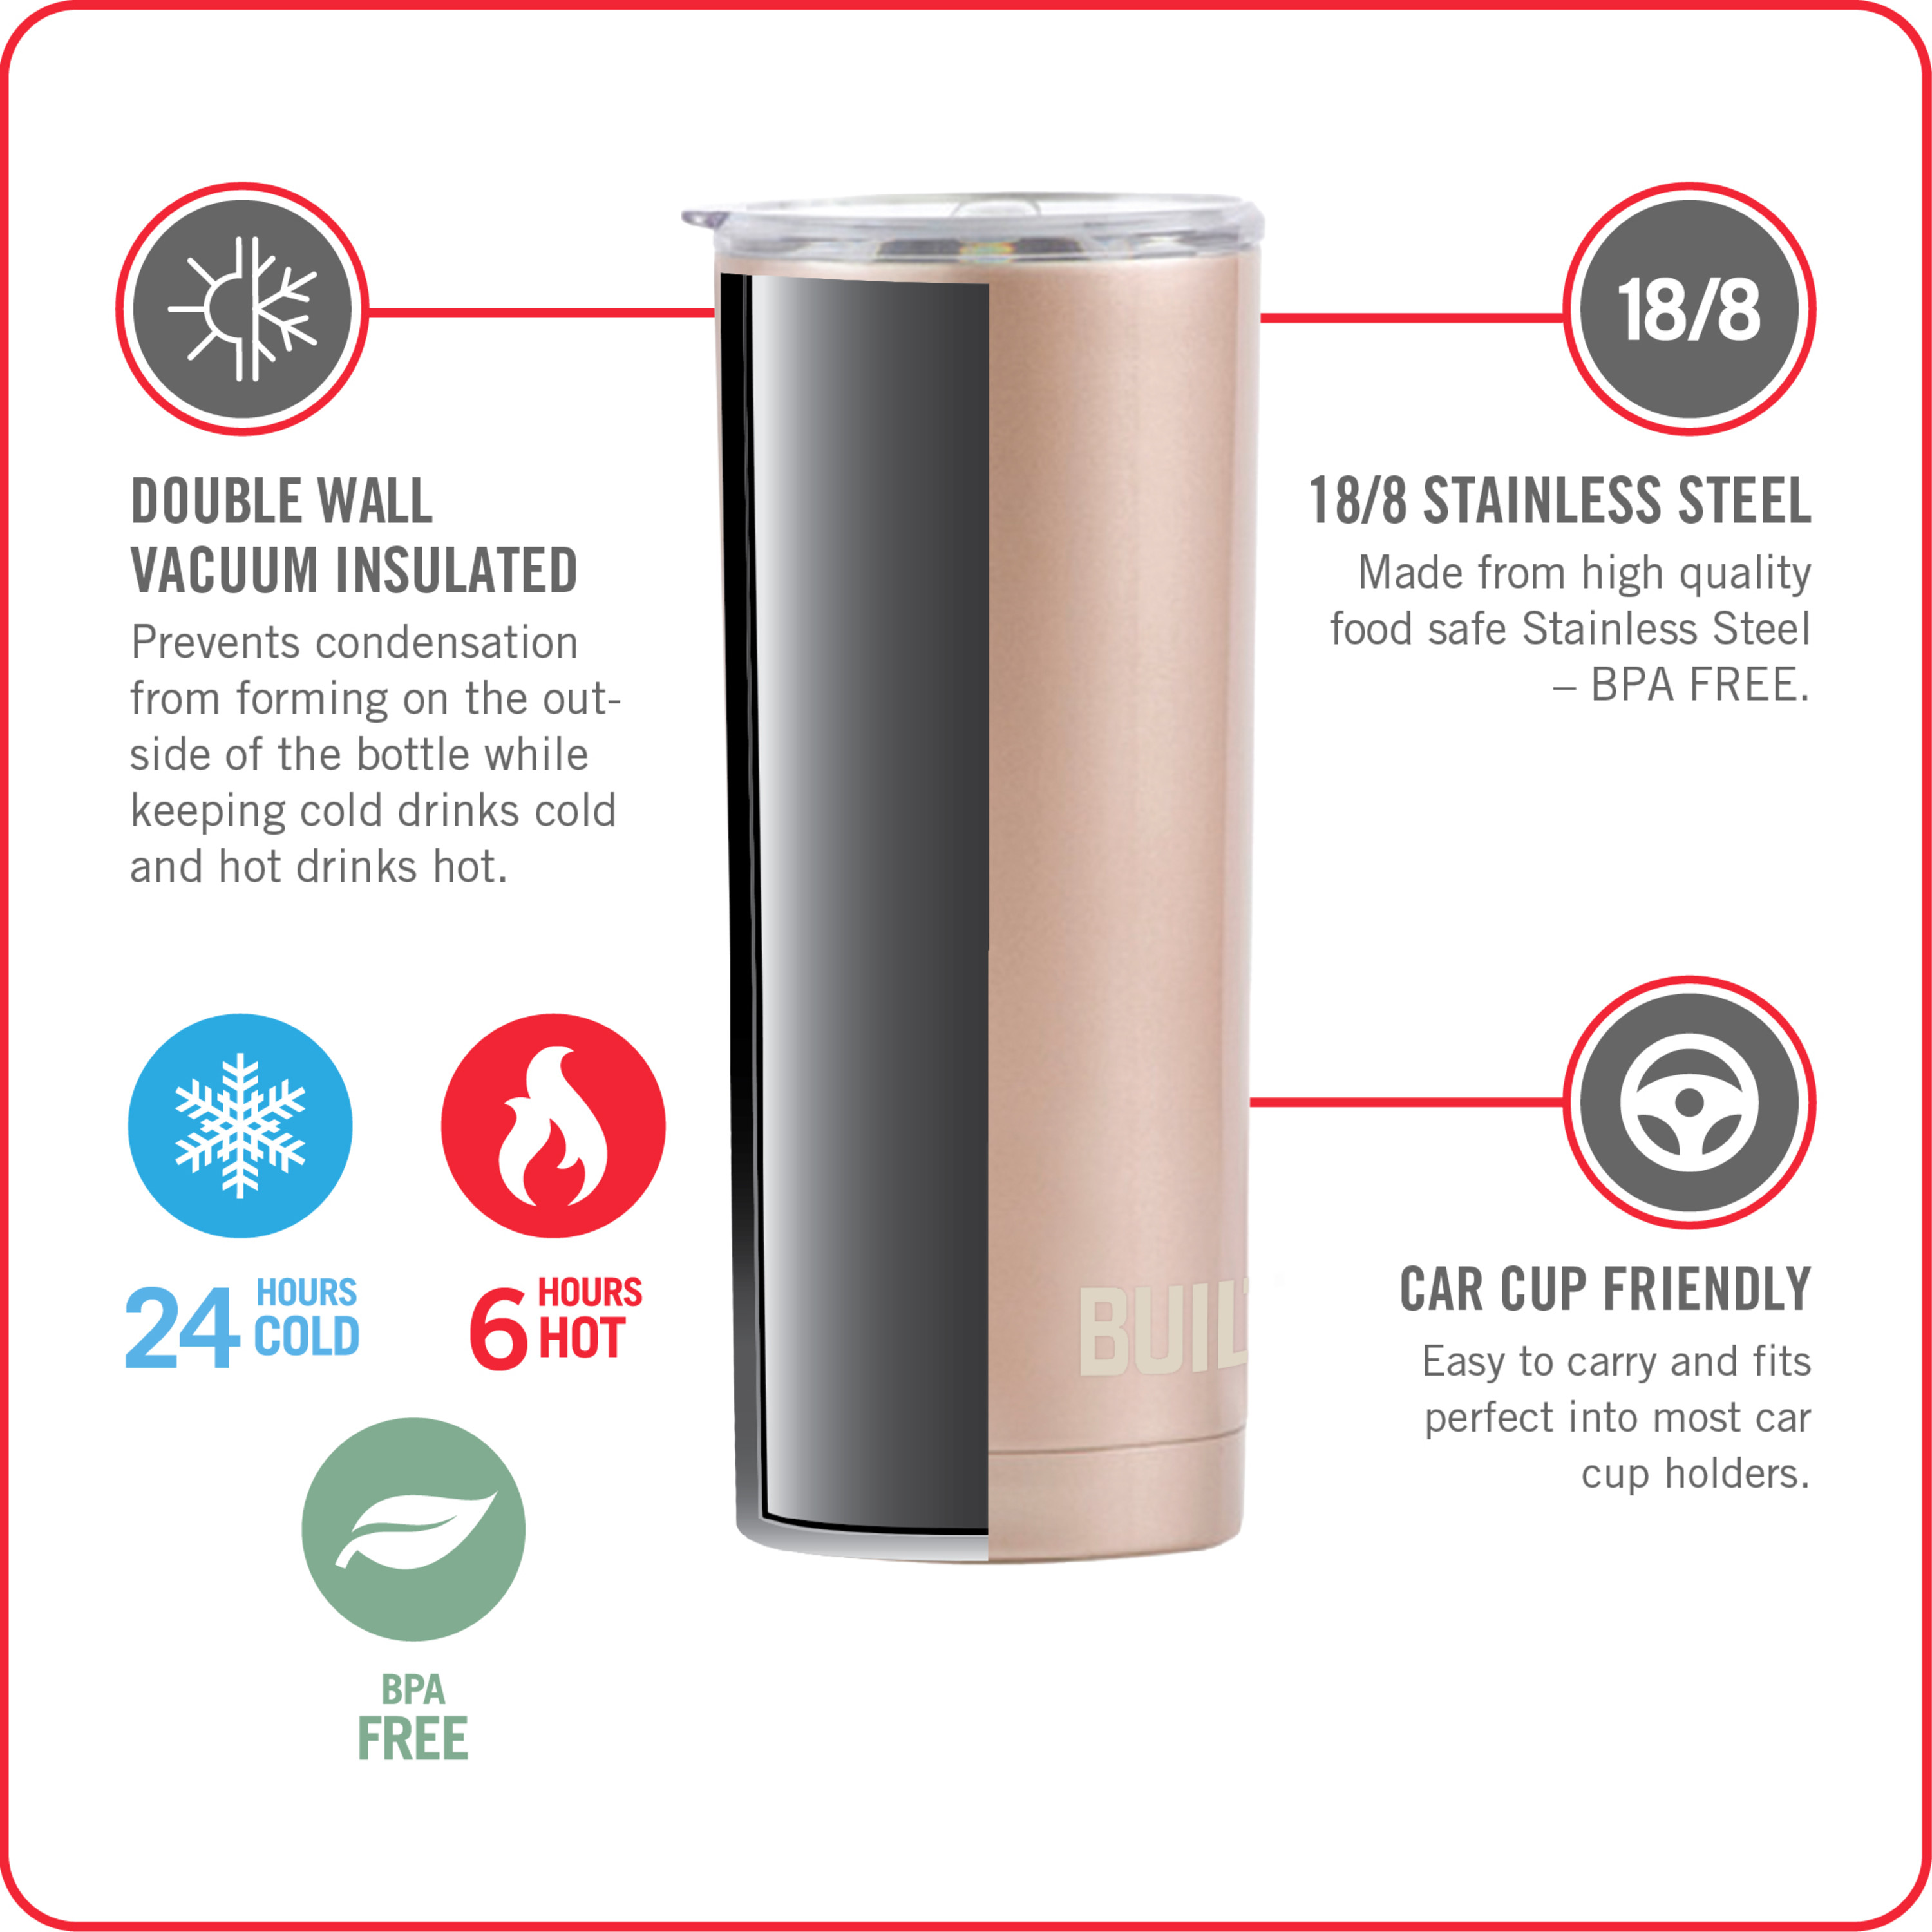 Built 20-Ounce Double-Wall Stainless Steel Tumbler in Blue - image 3 of 14